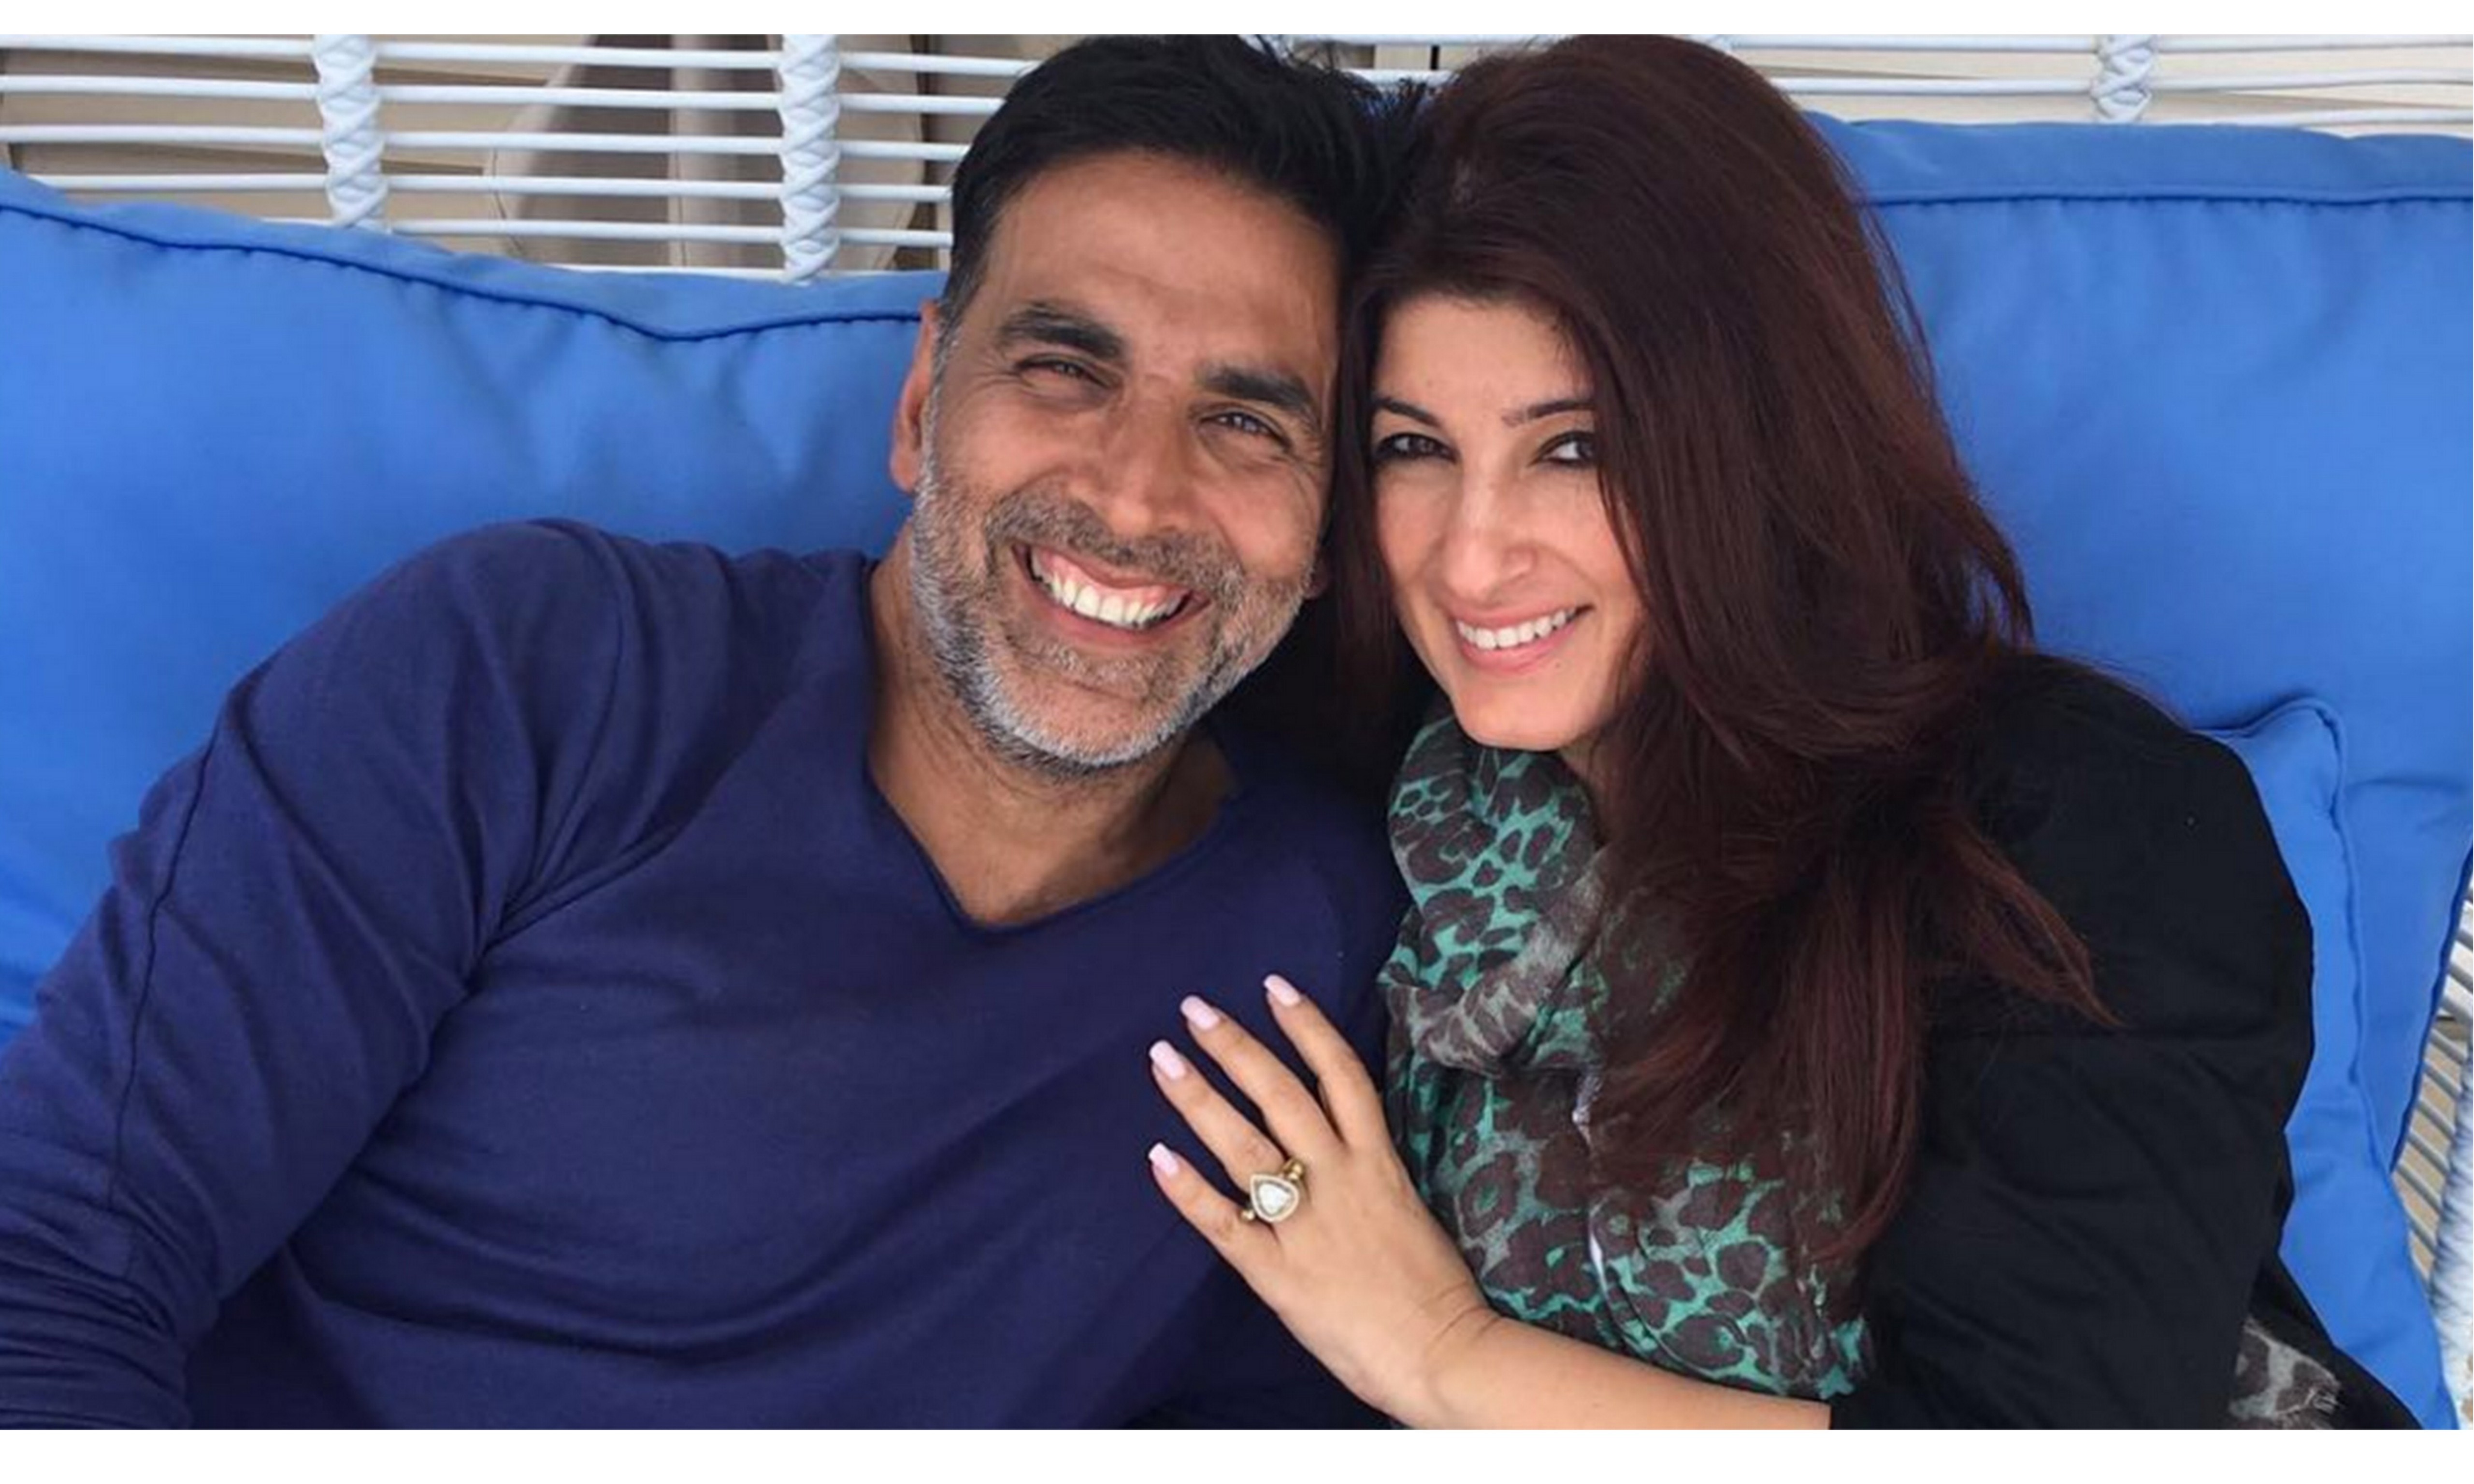 Akshay Kumar and Twinkle Khanna are reunitng for a movie titled 'Padman' as an actor and producer!